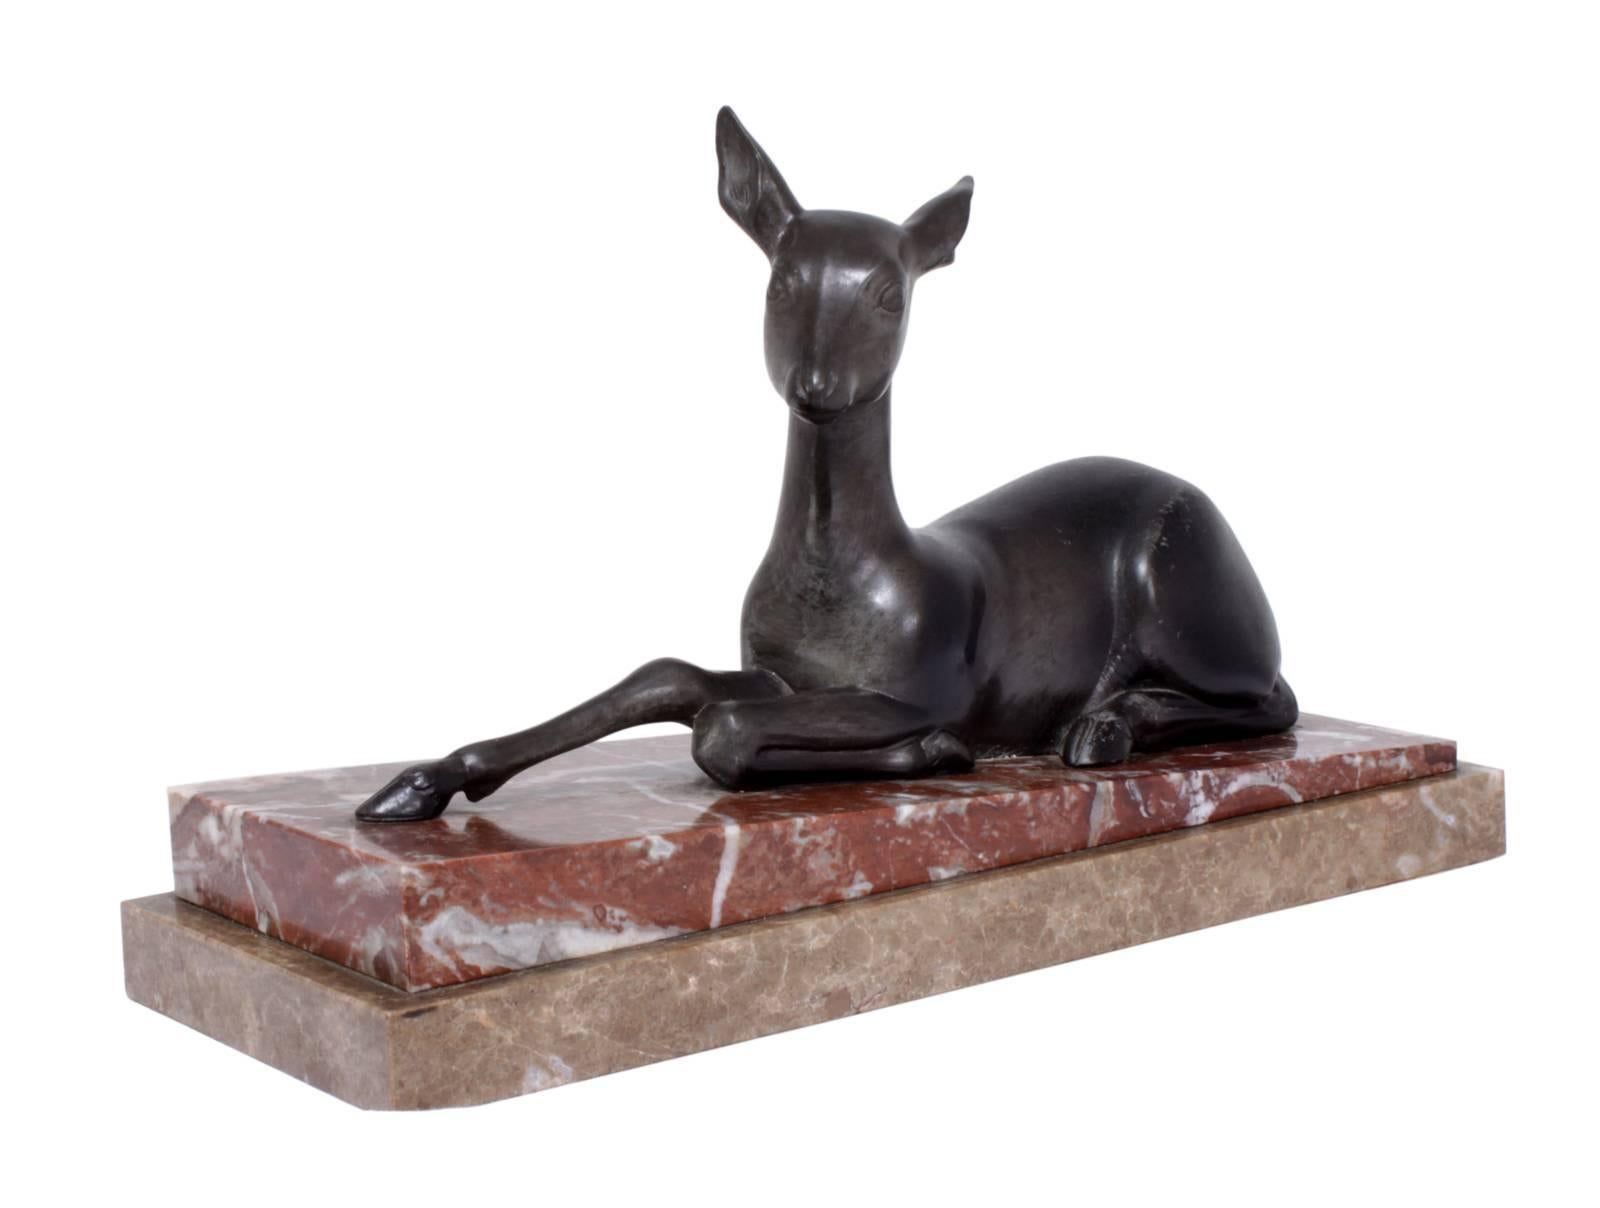 Bronze baby doe sculpture.
A small French bronze cast baby doe on slanted marble base, circa 1950.
Age: circa 1950.
Style: Art Deco
Material: Bronze
Condition: Very good.
Dimensions: 19 H x 30 W x 12 D cm.